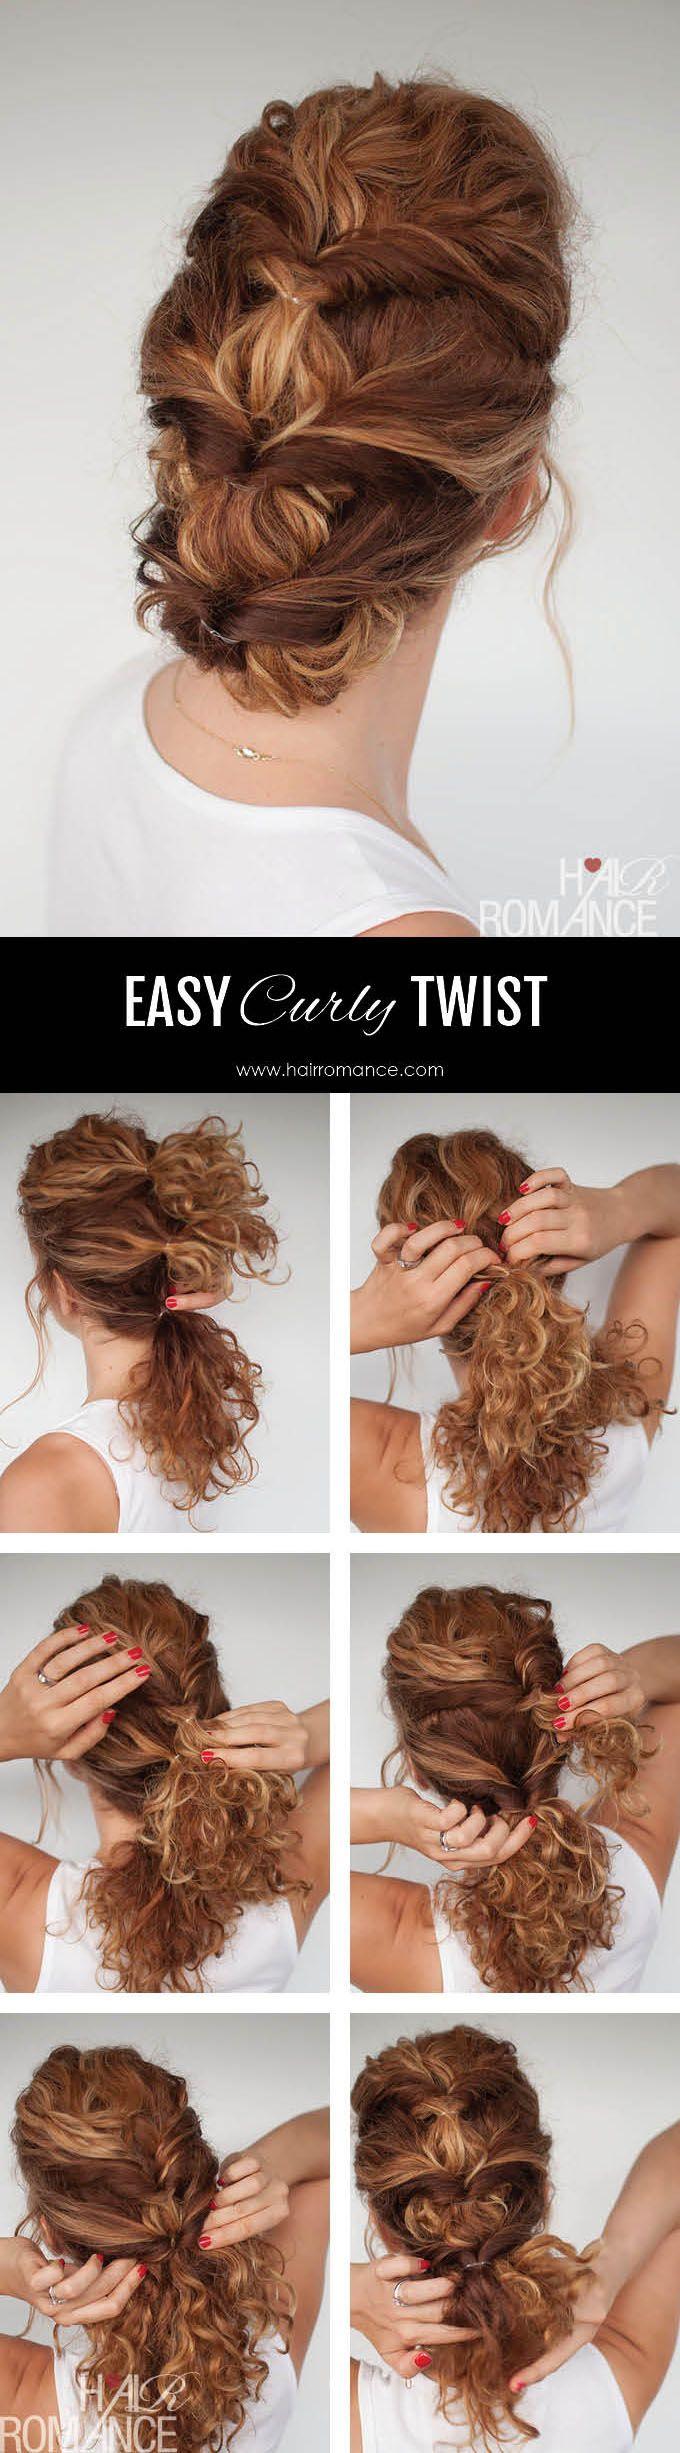 Wedding - Easy Everyday Curly Hairstyle Tutorial - The Curly Twist